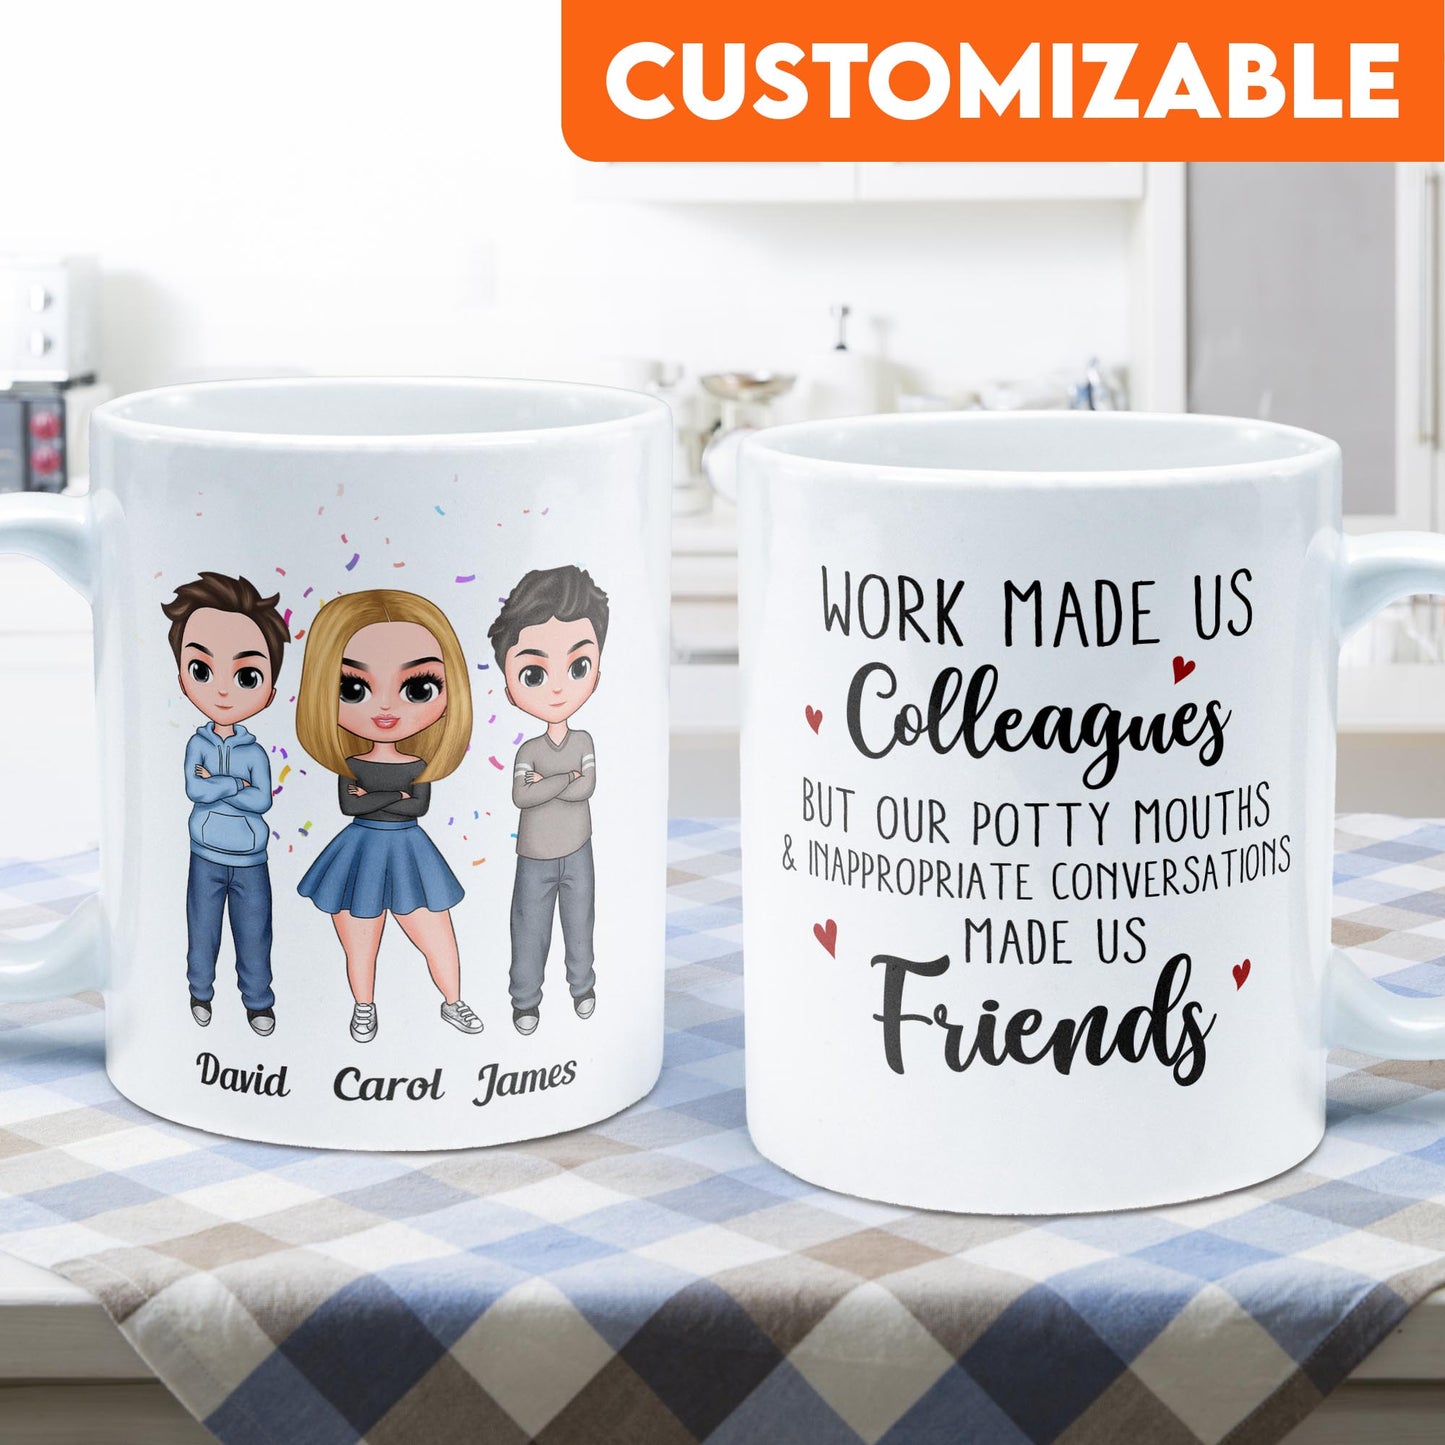 Potty Mouths & Inappropriate Conversations Made Us Friends - Personalized Mug - Birthday, Christmas Gift For Colleagues